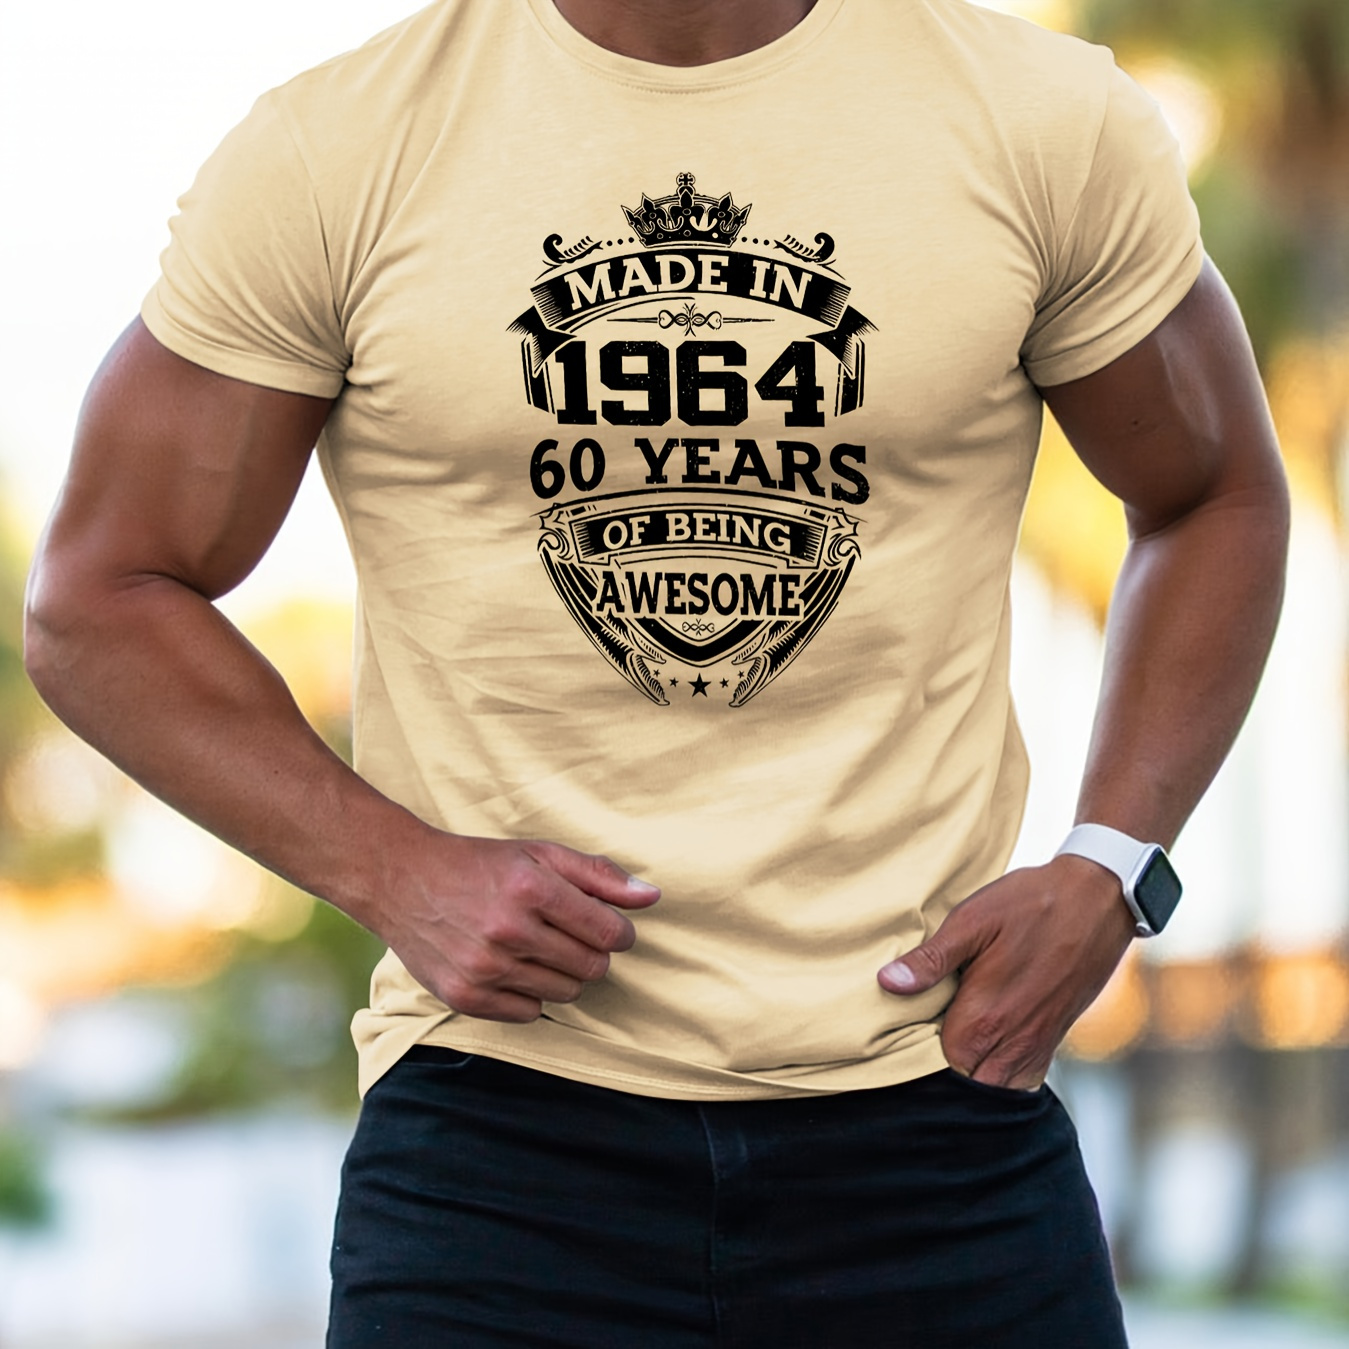 

Made In 1964 60 Years Print, Men's Comfy T-shirt, Casual Fit Tees For Summer, Men's Clothing Tops For Daily Activities